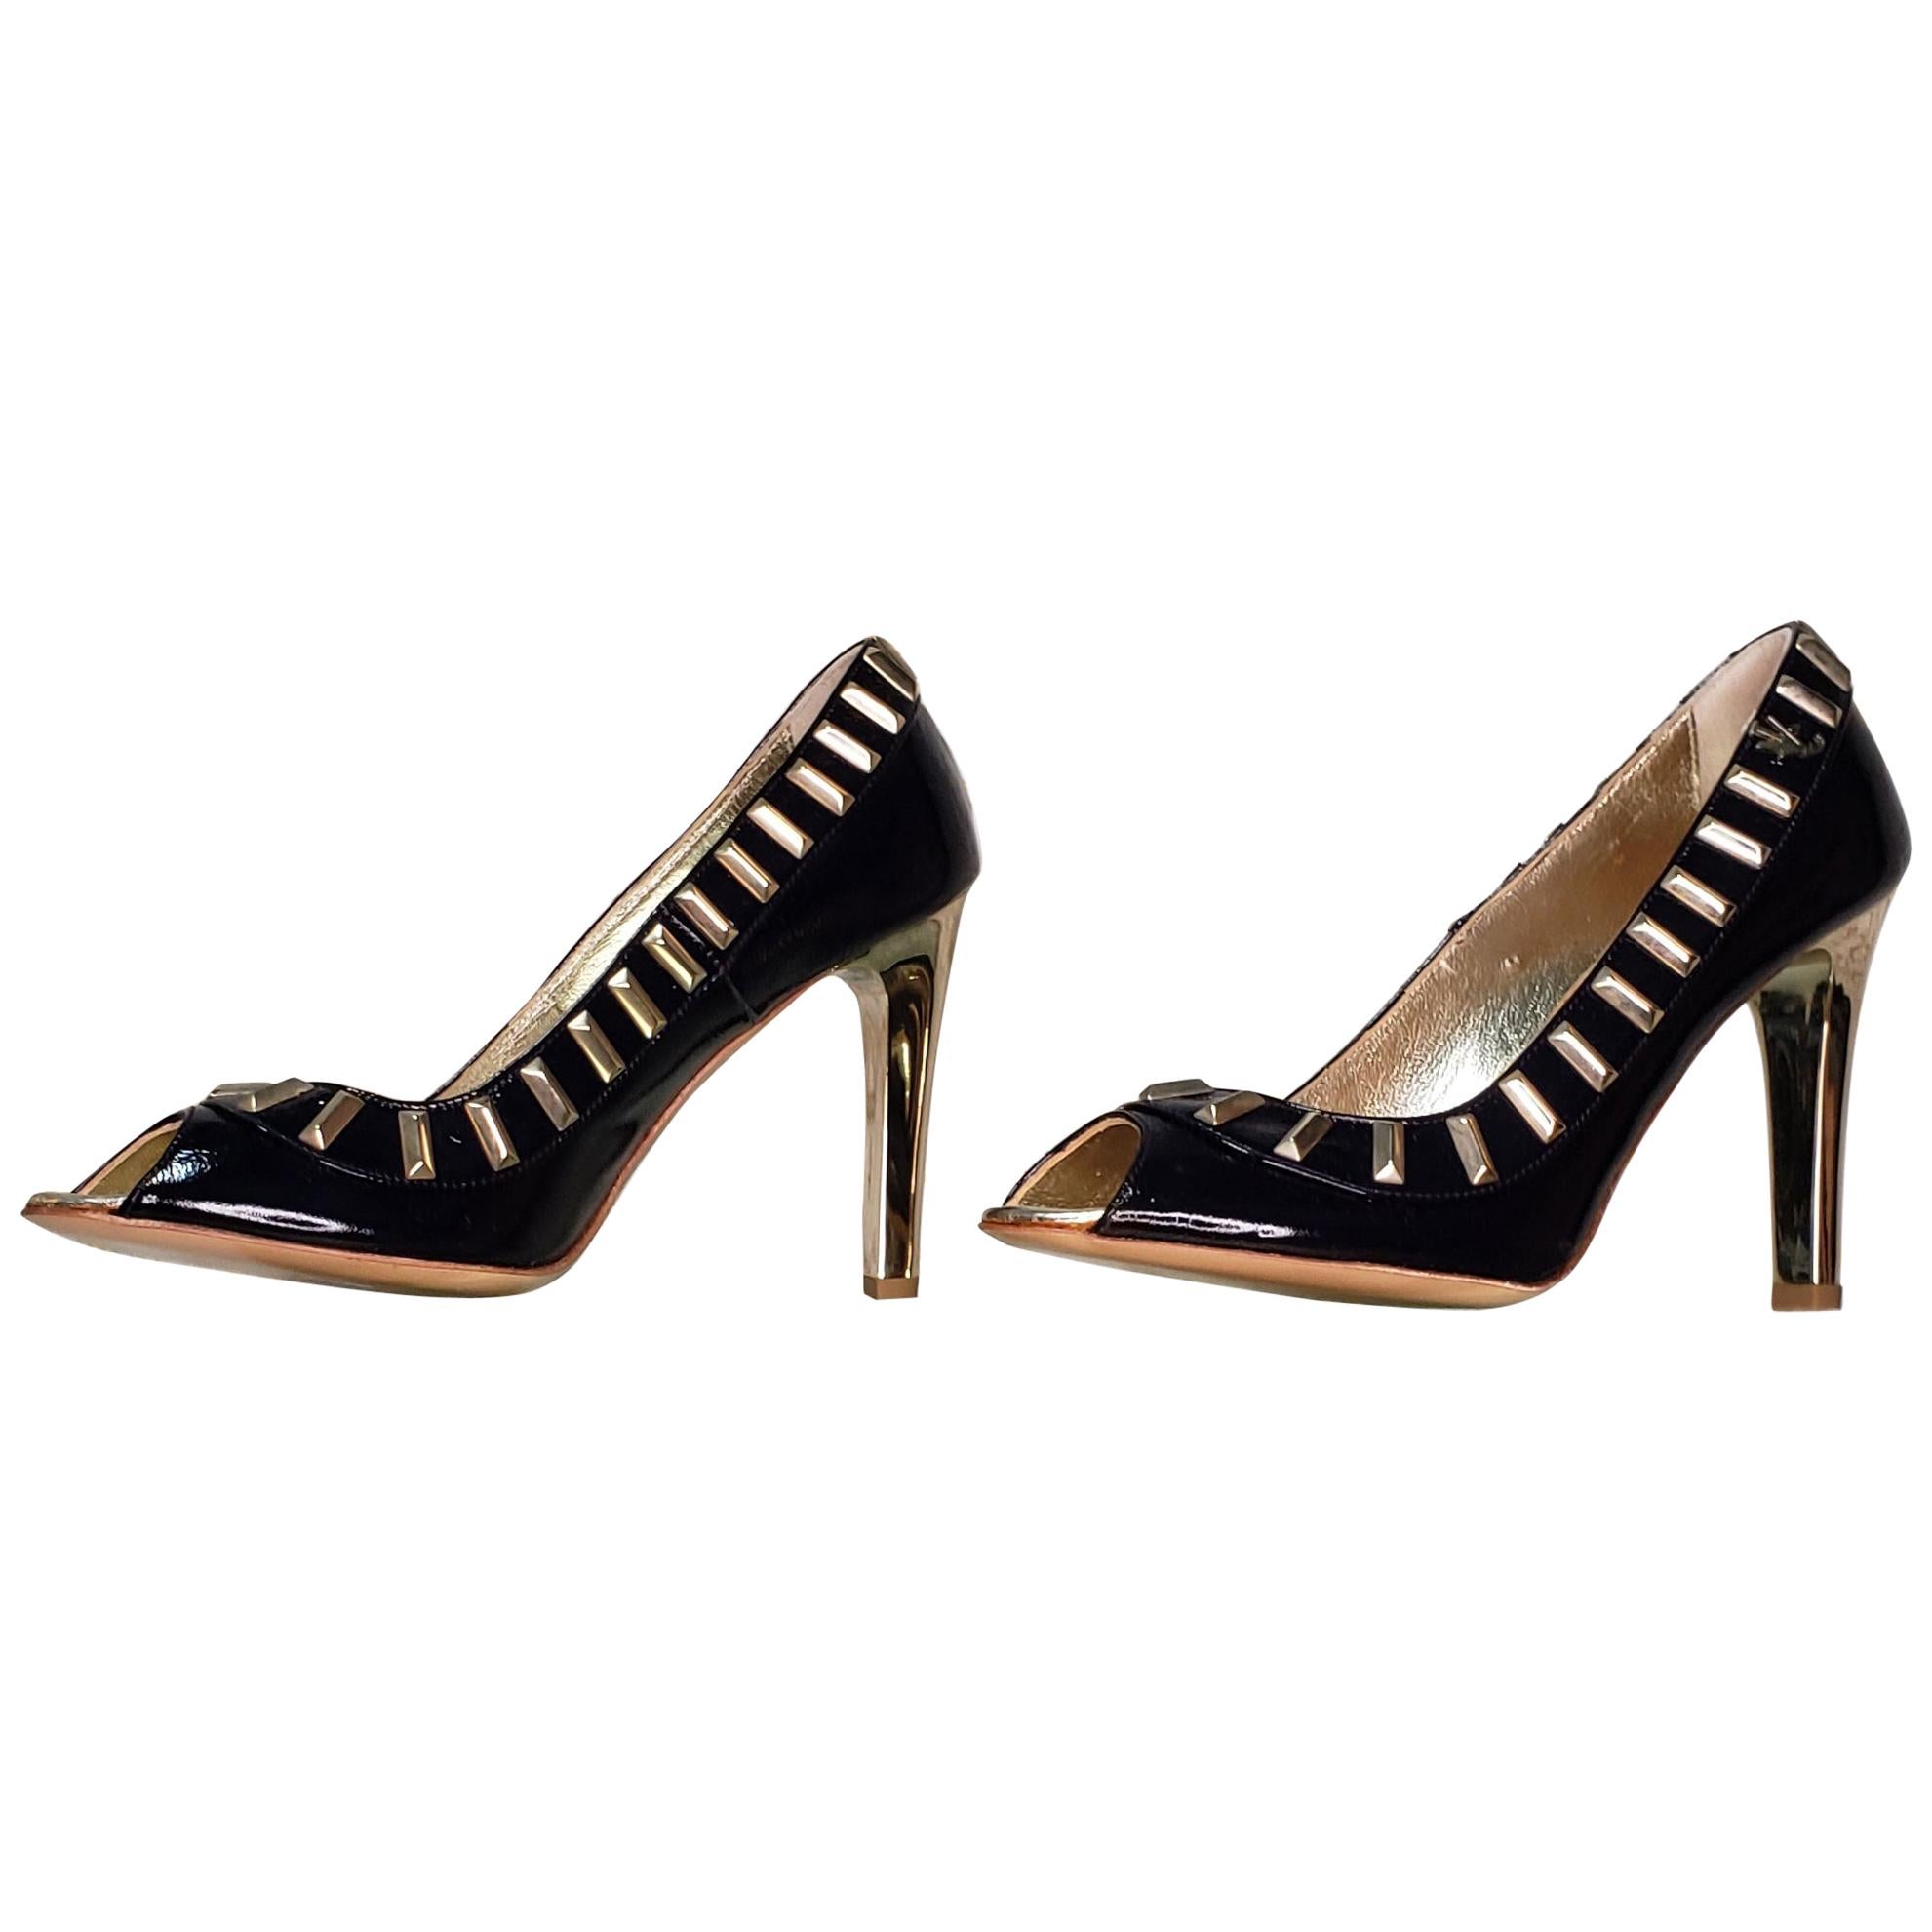 VERSACE JEANS COUTURE PUMPS In DARK NAVY BLUE with GOLD HEELS 36.5 - 6.5,  39 -9 For Sale at 1stDibs | navy blue and gold heels, rock and roll jeans,  navy and gold heels